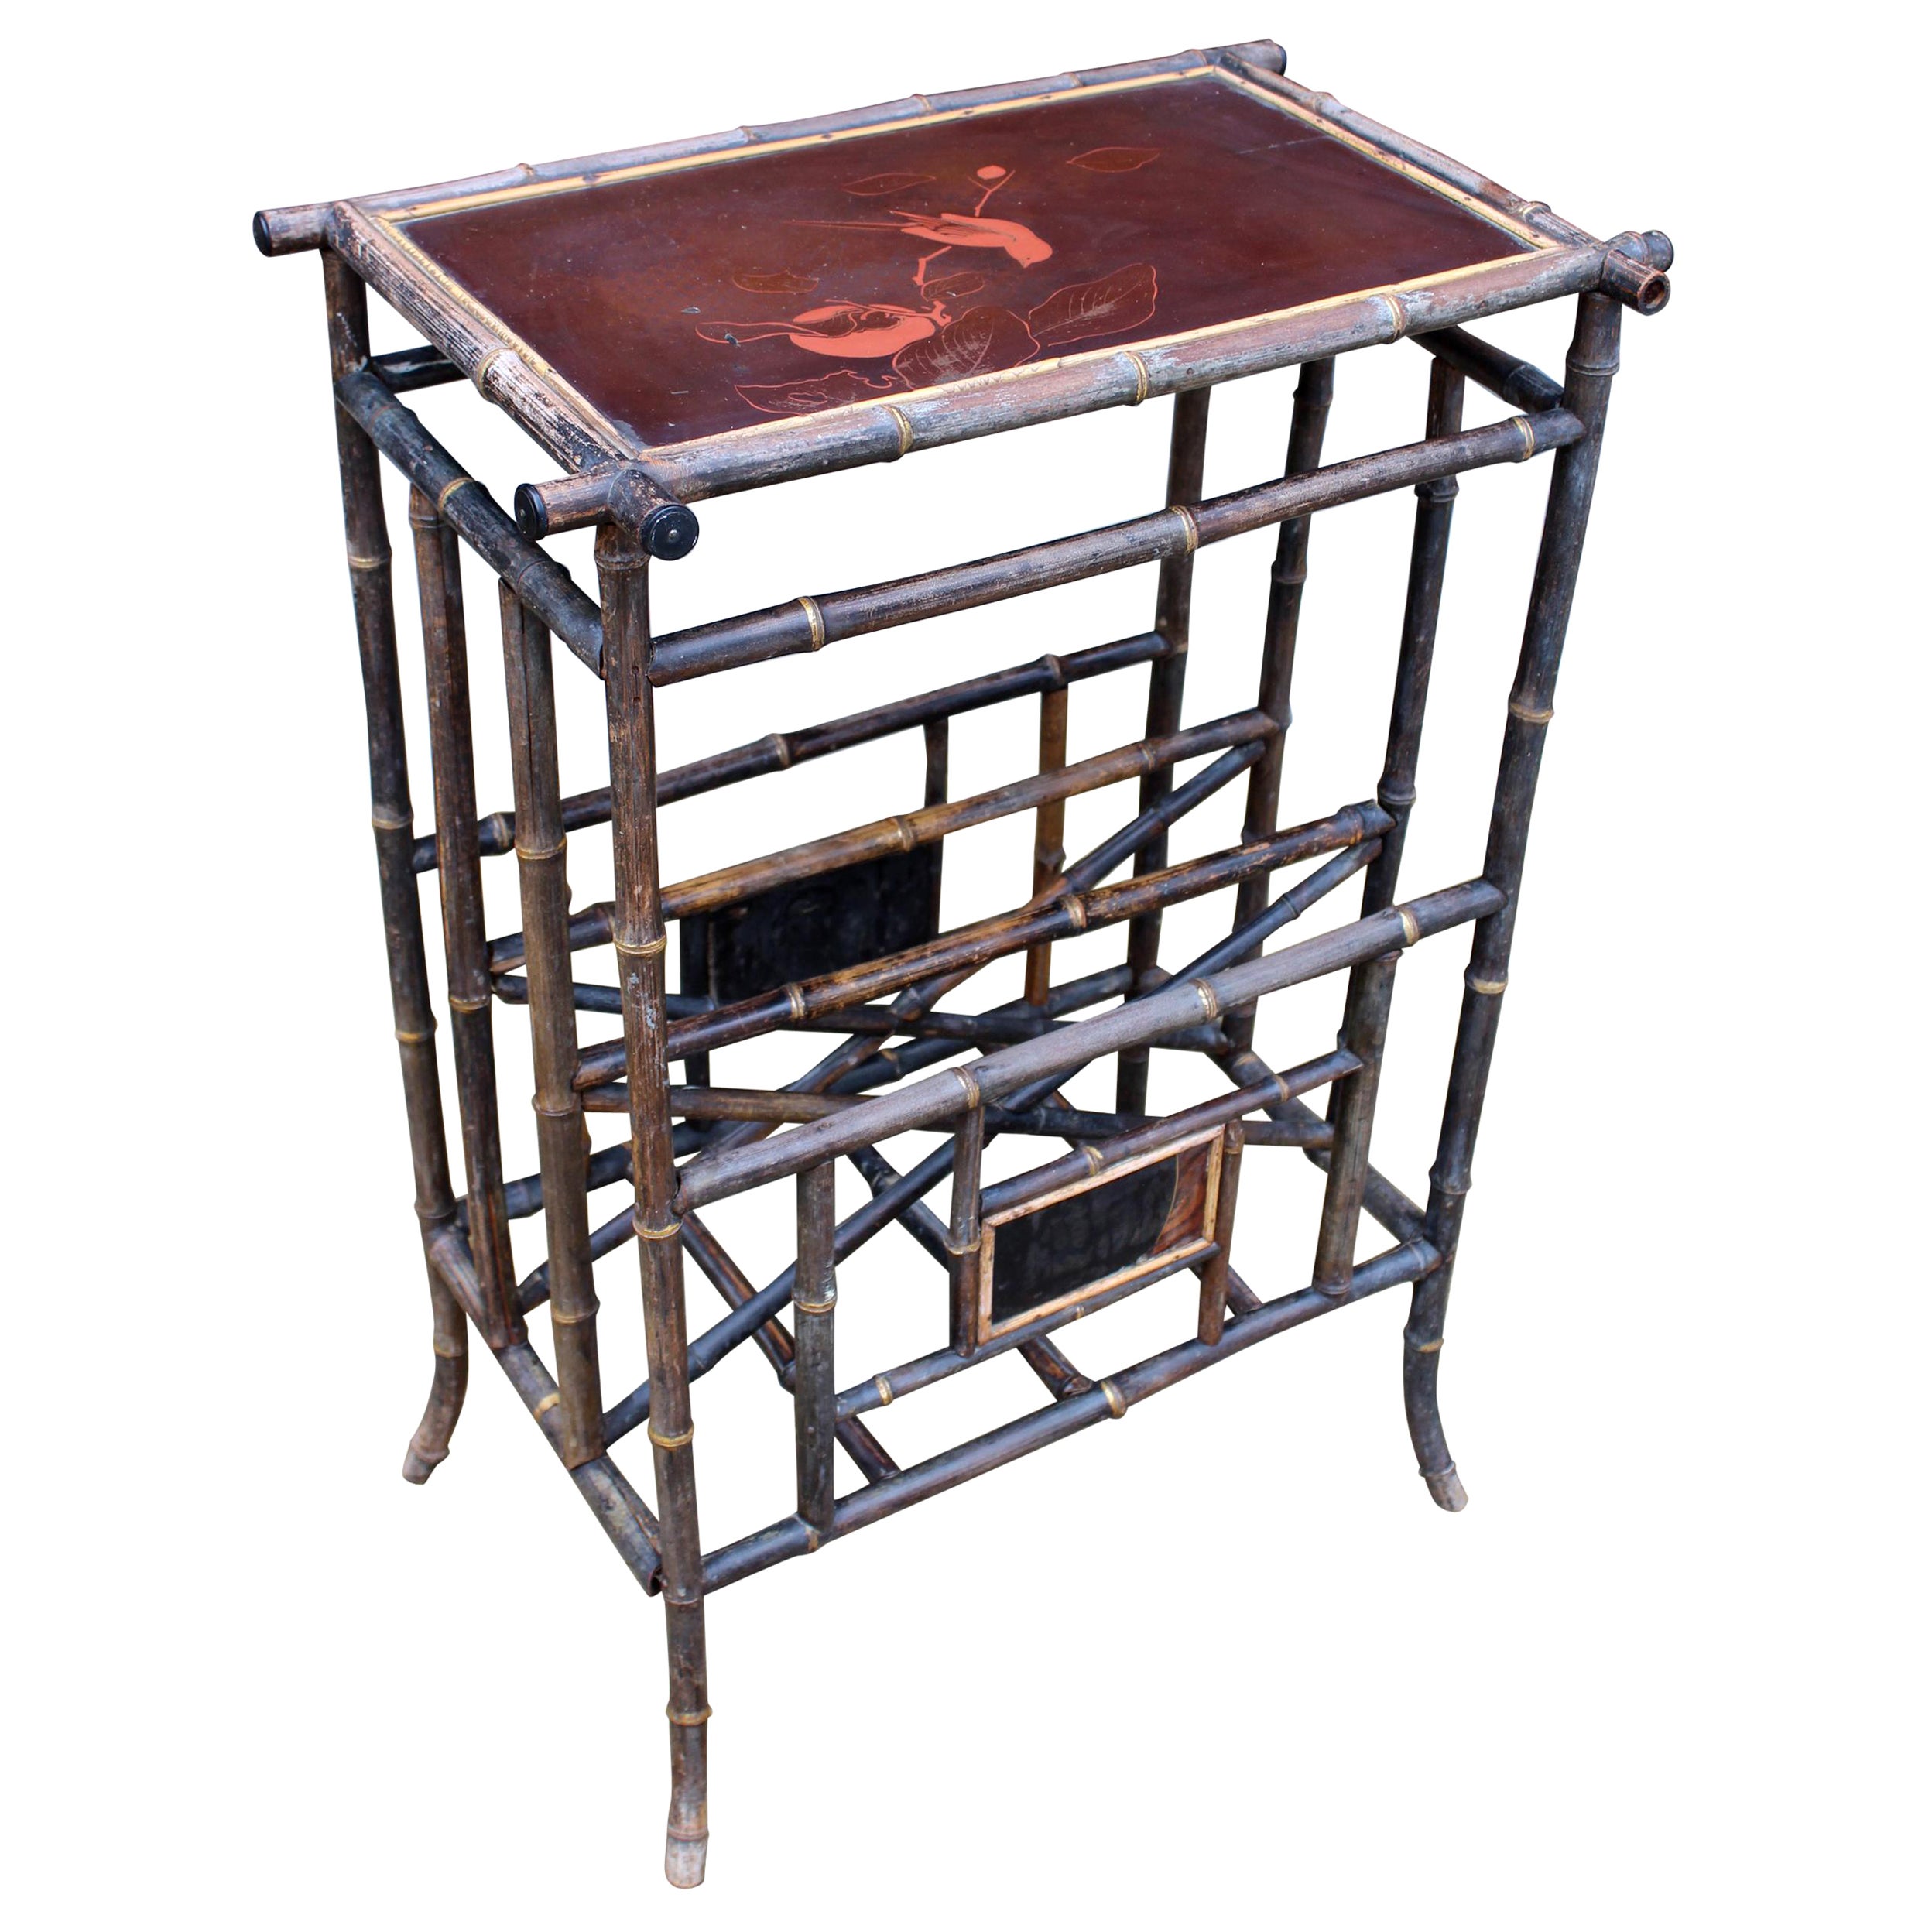 1950s, Lacquer Decorated English Bamboo Side Table with Magazine Holder